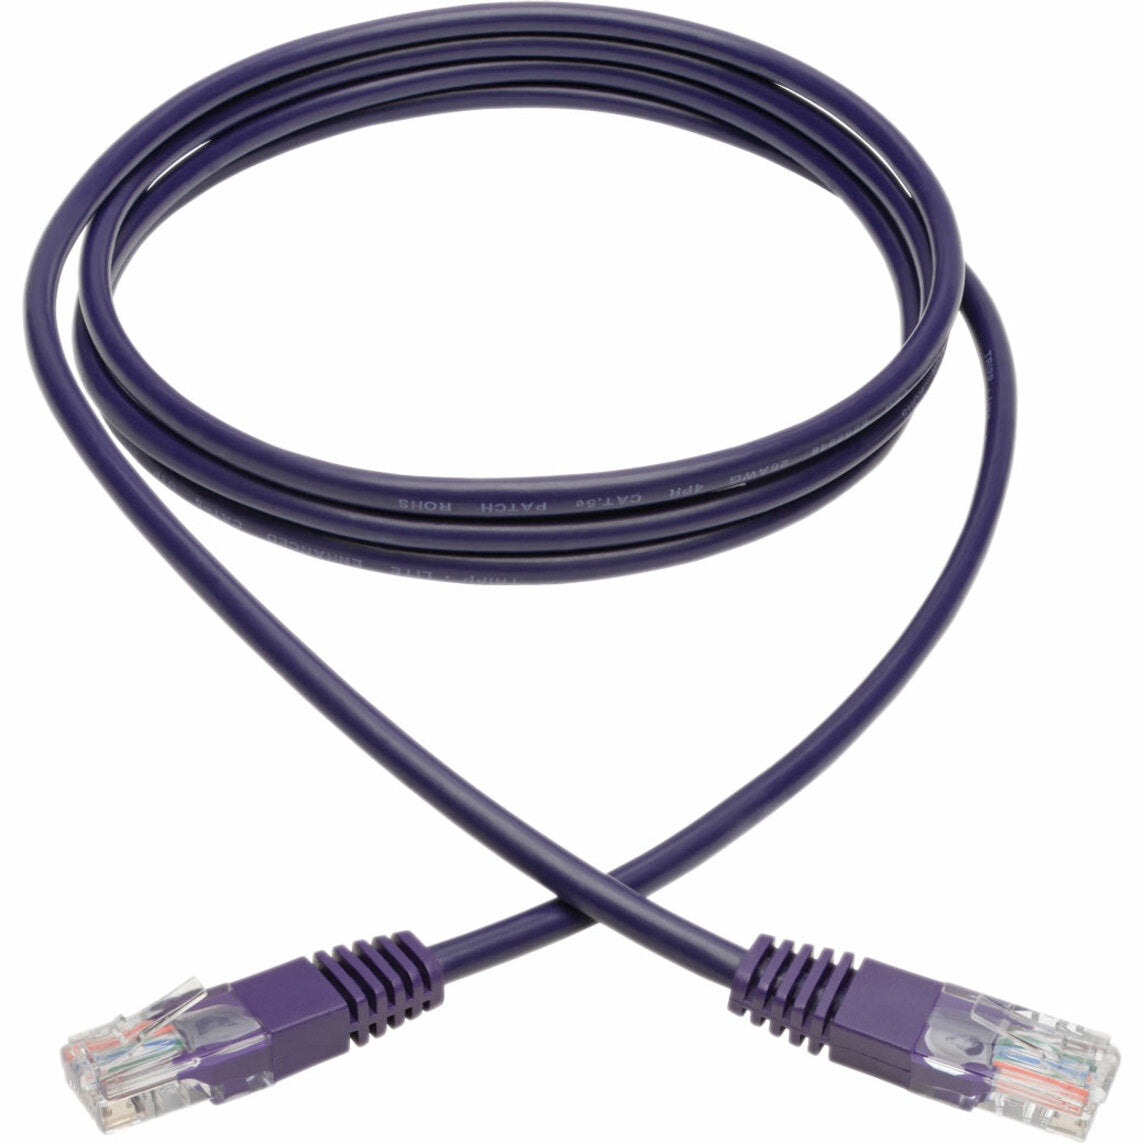 Tripp Lite by Eaton CABLE CAT5E 350MHZ MOLDED PATCH PURP 6FT (N002-006-PU)